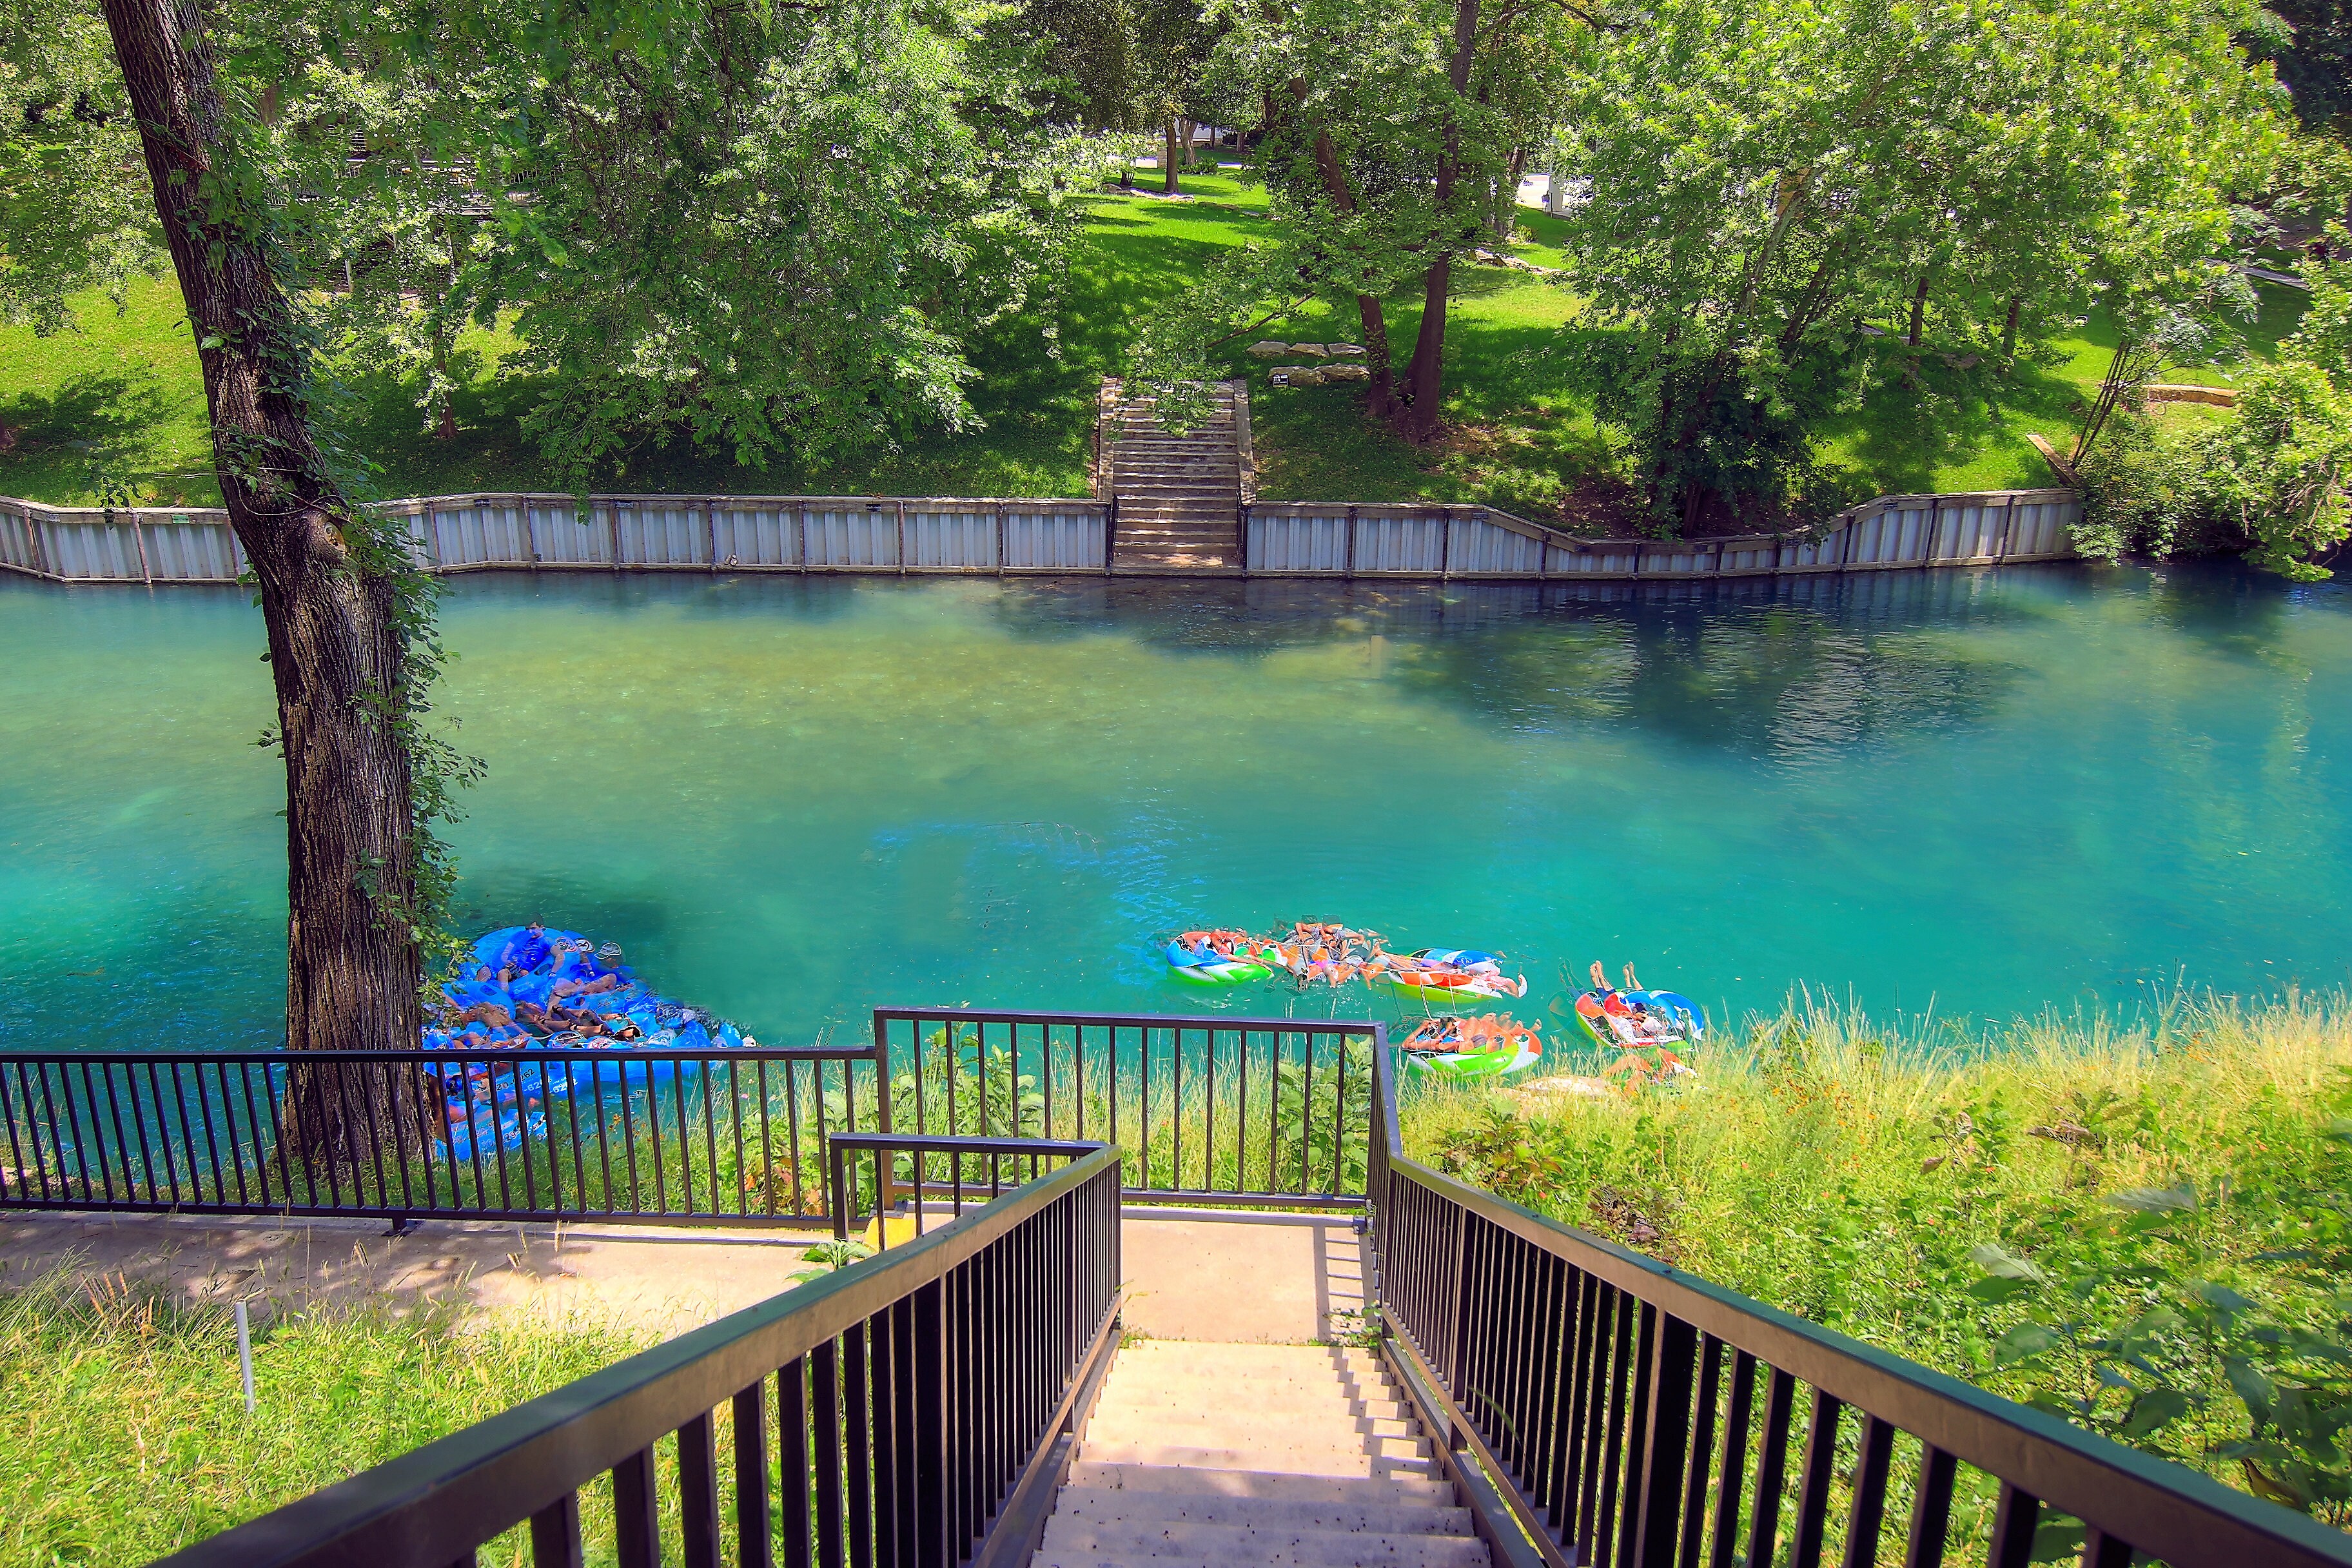 Fun on the Comal has beautiful and convenient private access to the Comal River.